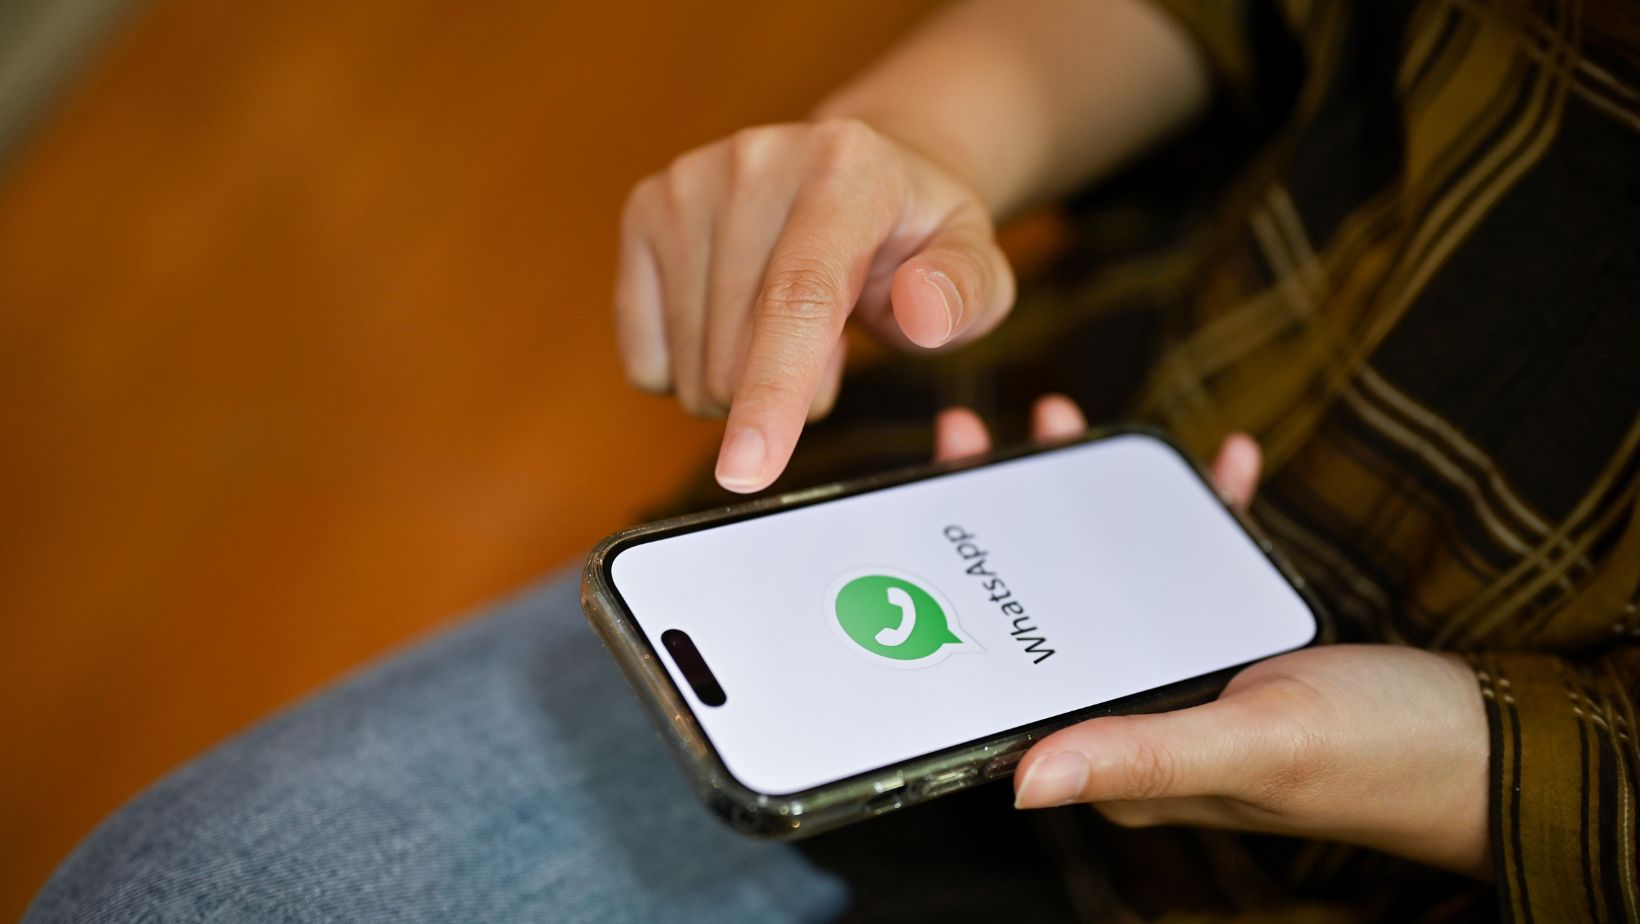 Secure and Private: Why Use Whatsapp for Dating